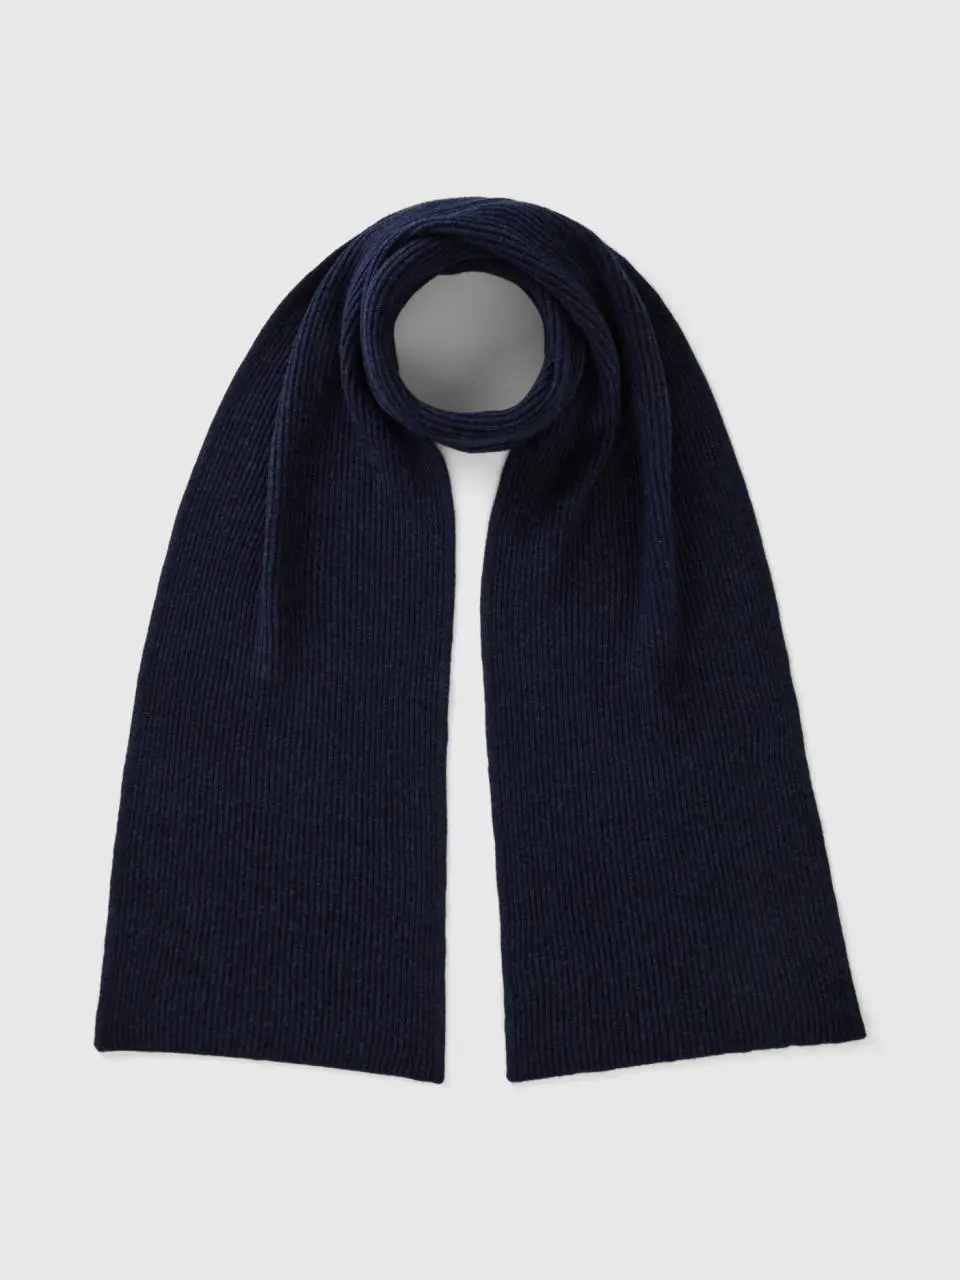 Benetton scarf in wool and cashmere blend. 1